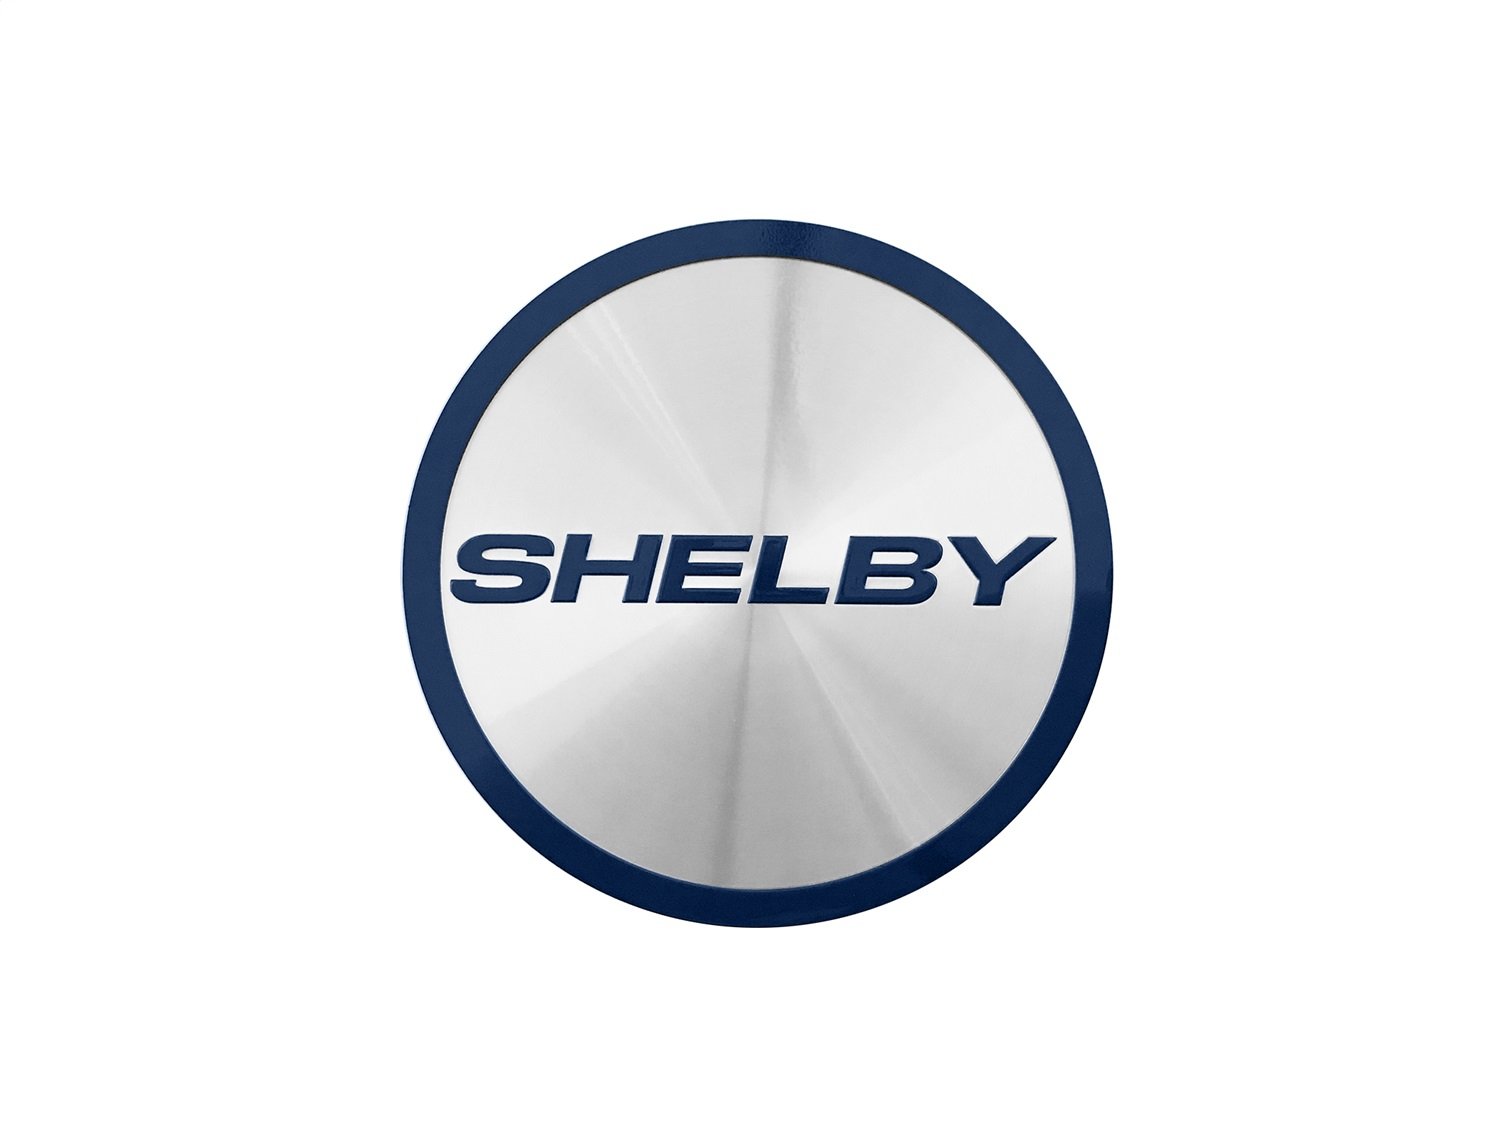 Shelby Fuse Box Cover Insert